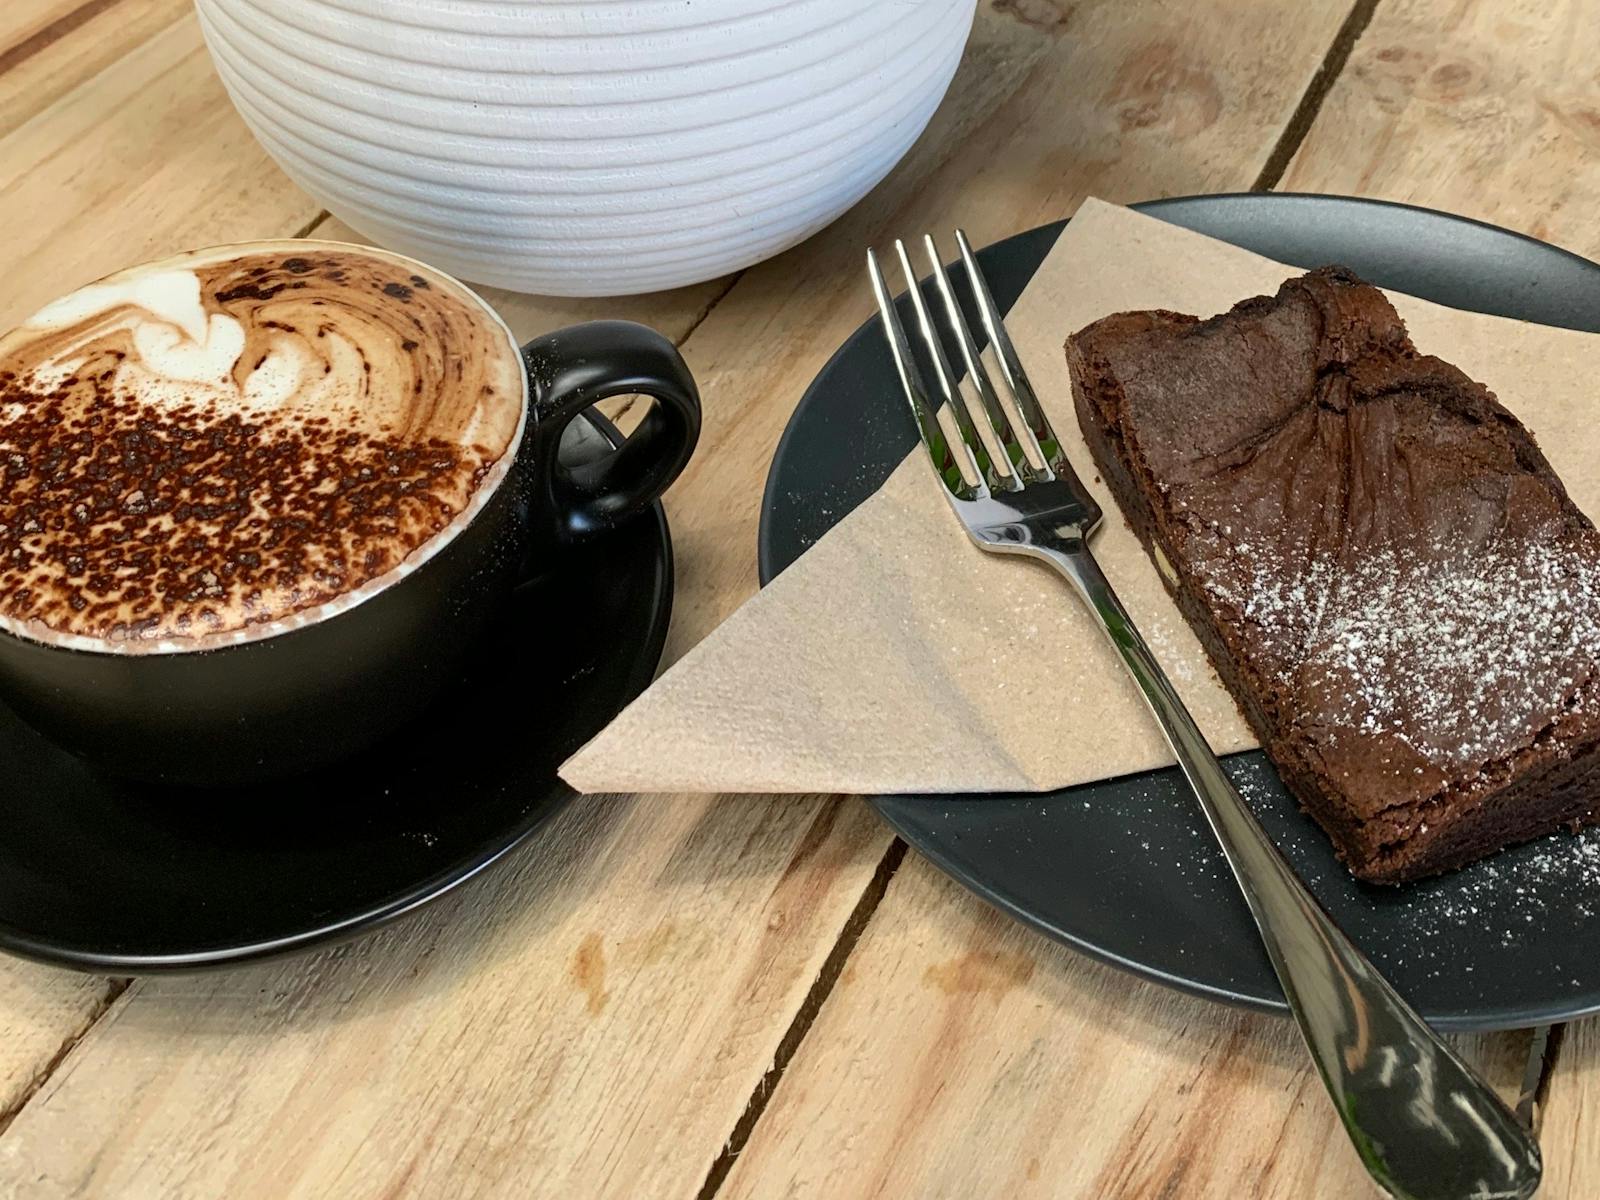 Sweet Treats - Locally made brownies are in the menu